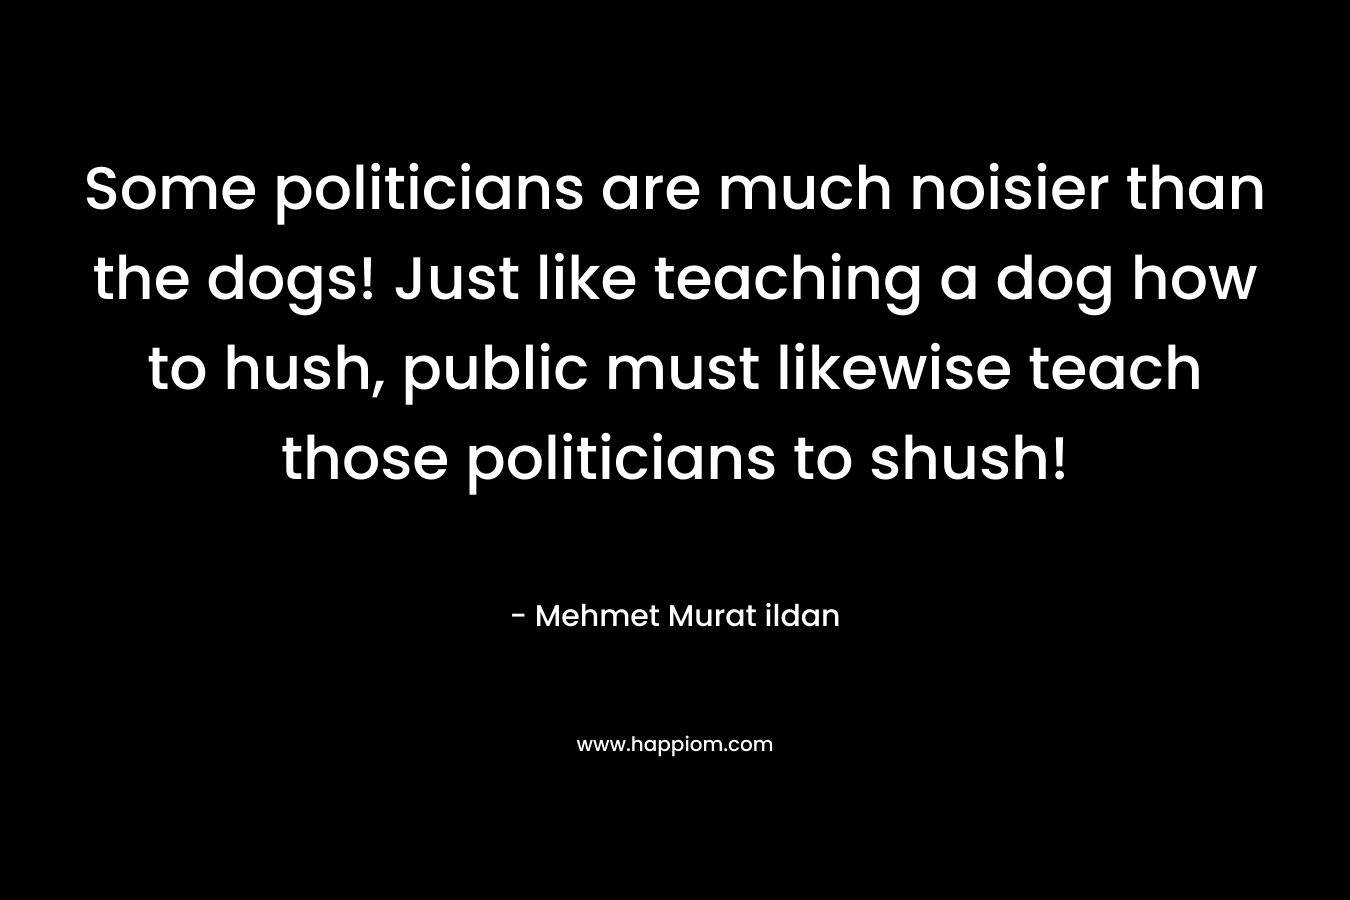 Some politicians are much noisier than the dogs! Just like teaching a dog how to hush, public must likewise teach those politicians to shush! – Mehmet Murat ildan